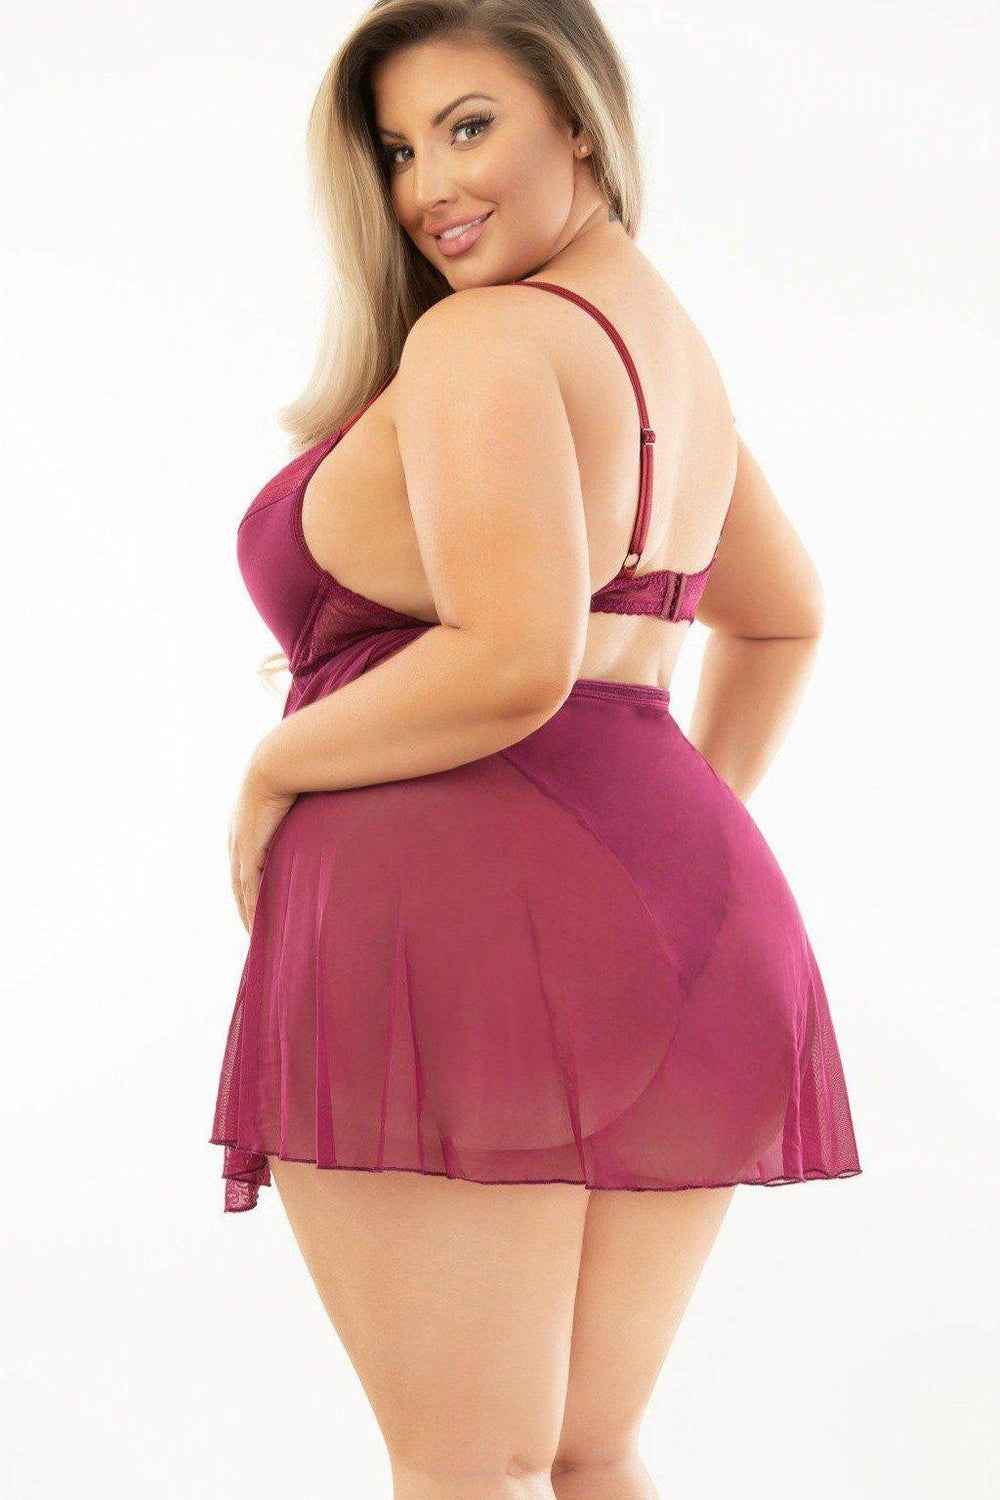 Plus Size Lace Teddy with Babydoll Skirt-Plus Teddy-Escante-SEXYSHOES.COM